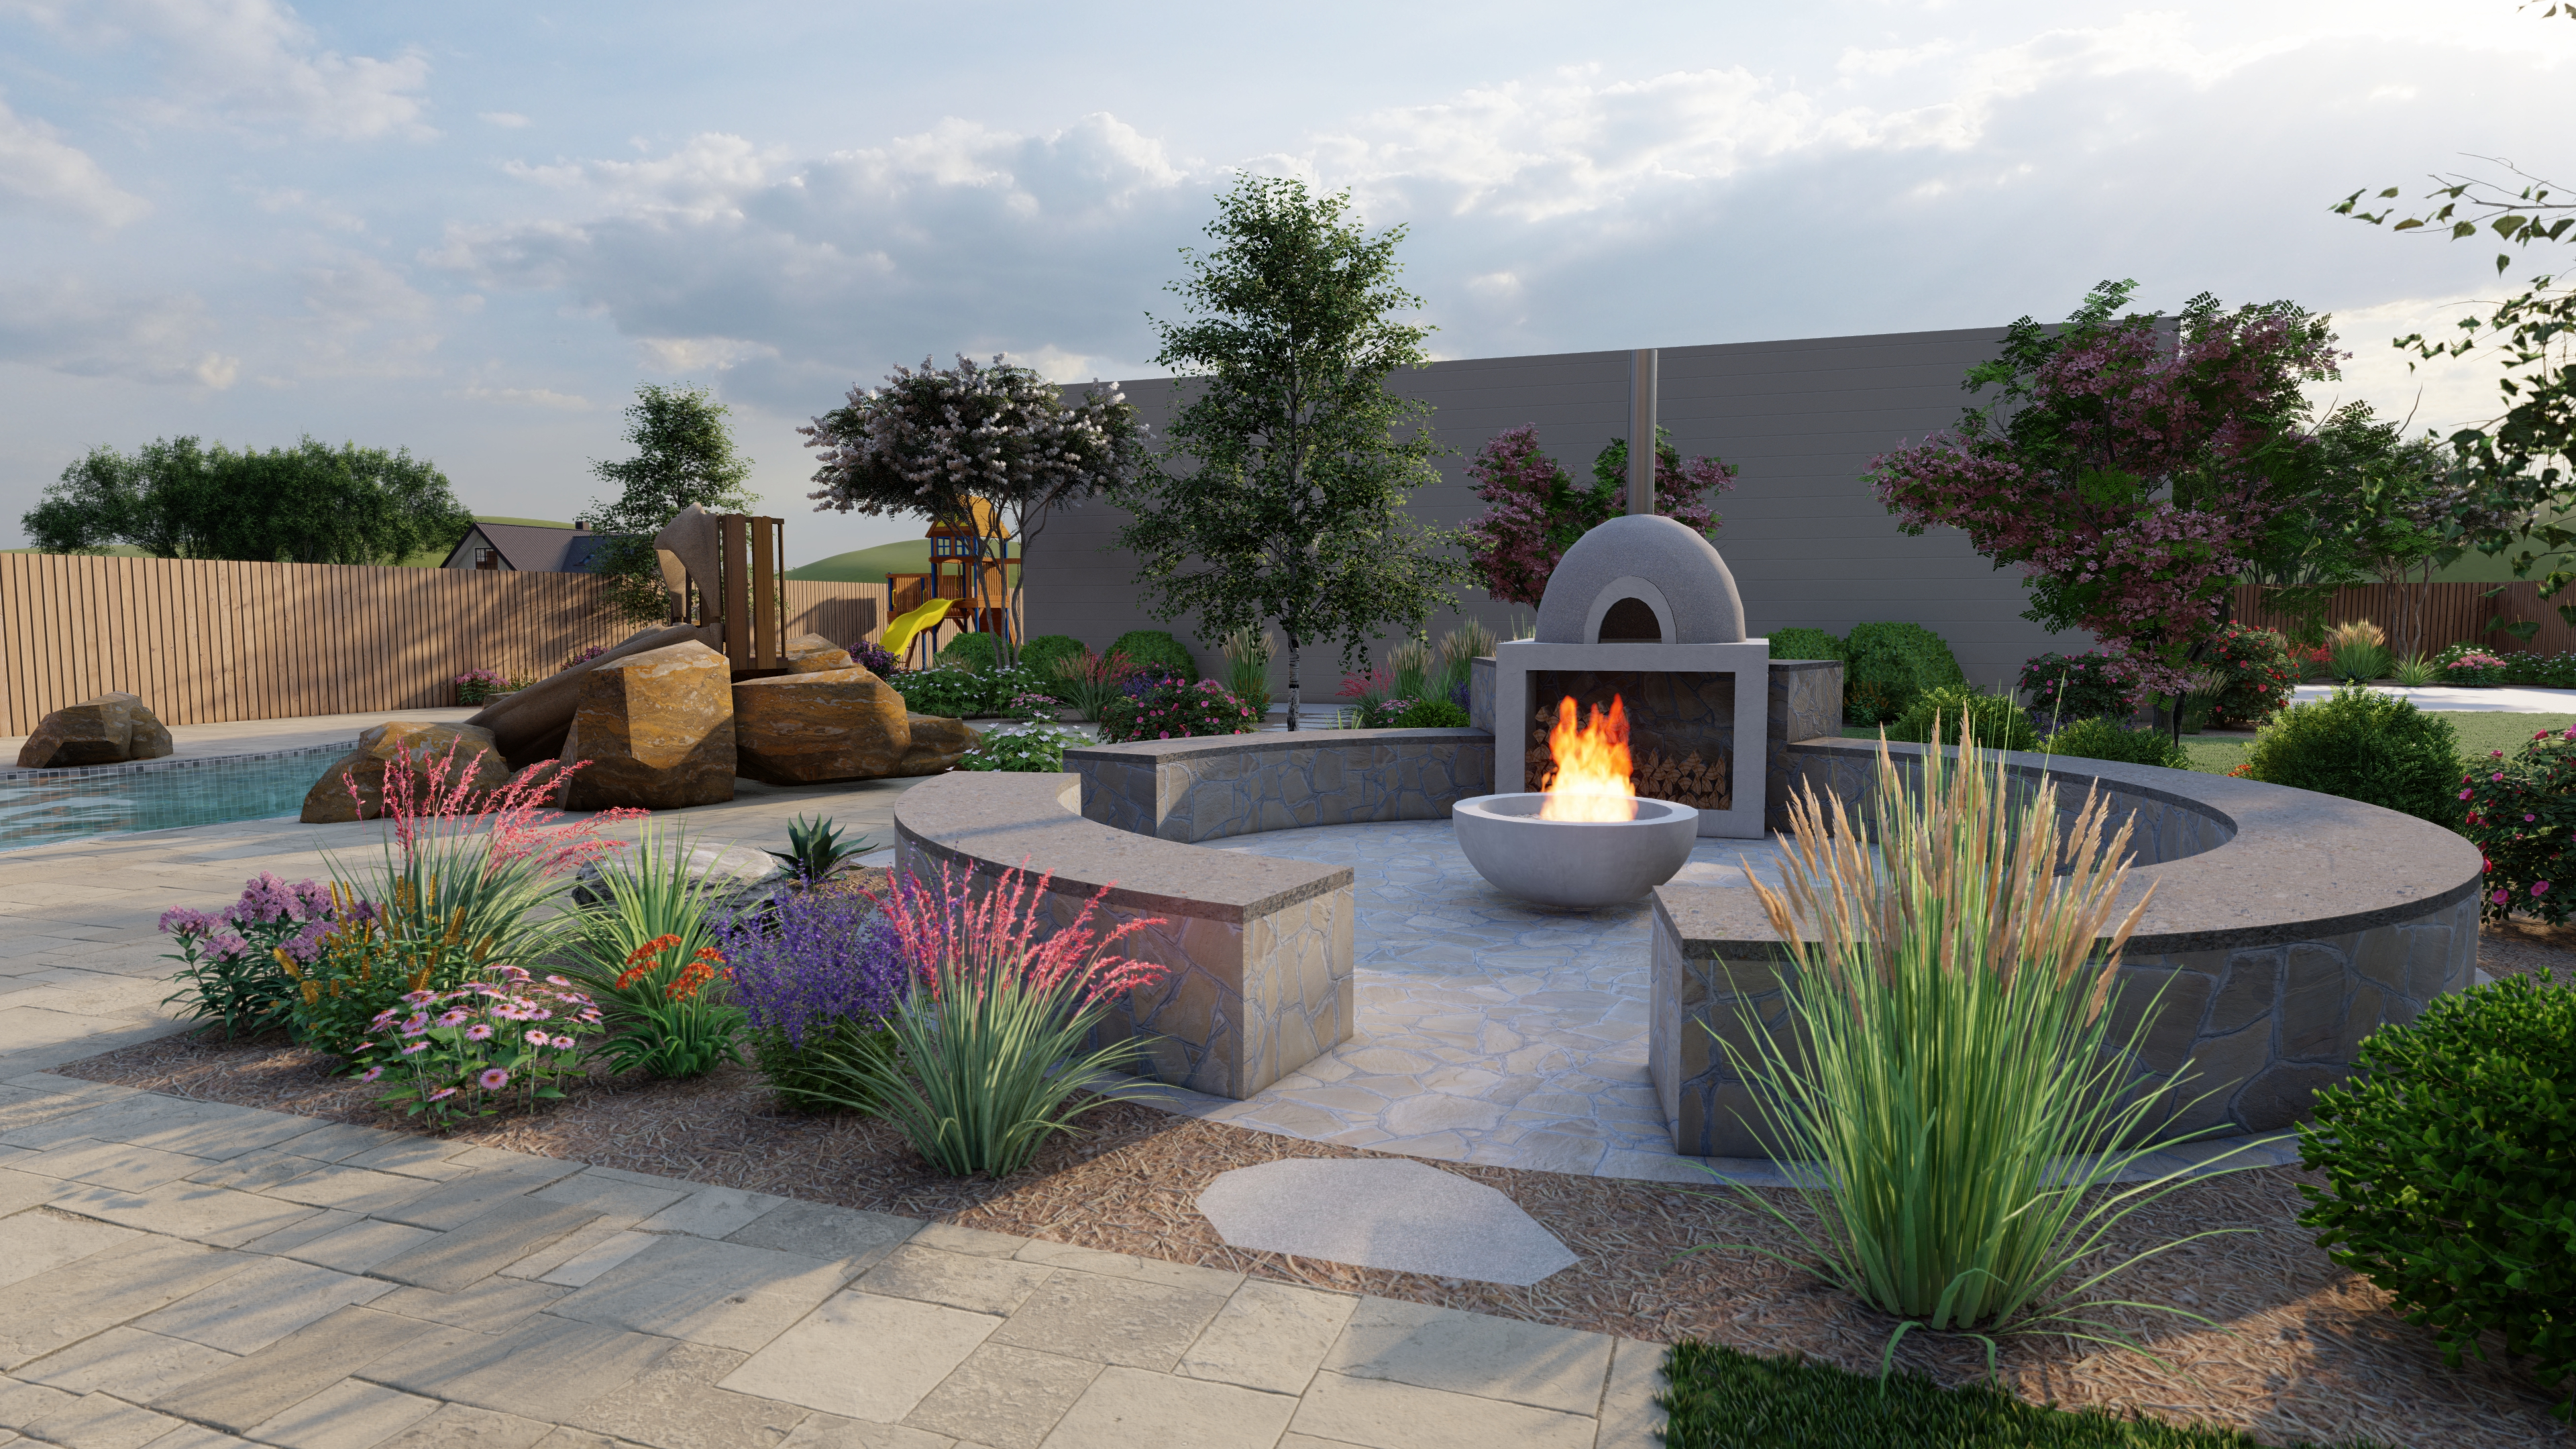 A natural rock garden behind a fire pit area lined with pea gravel and pavers